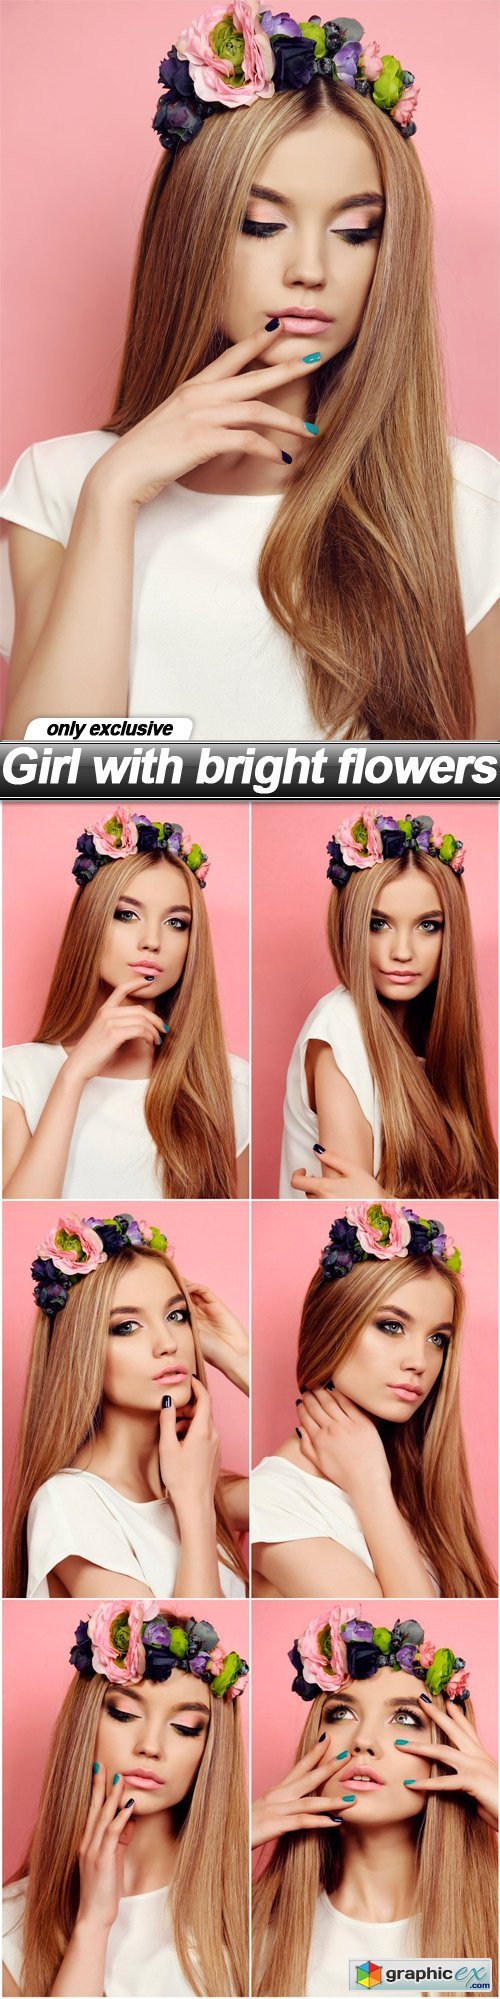 Girl with bright flowers - 7 UHQ JPEG